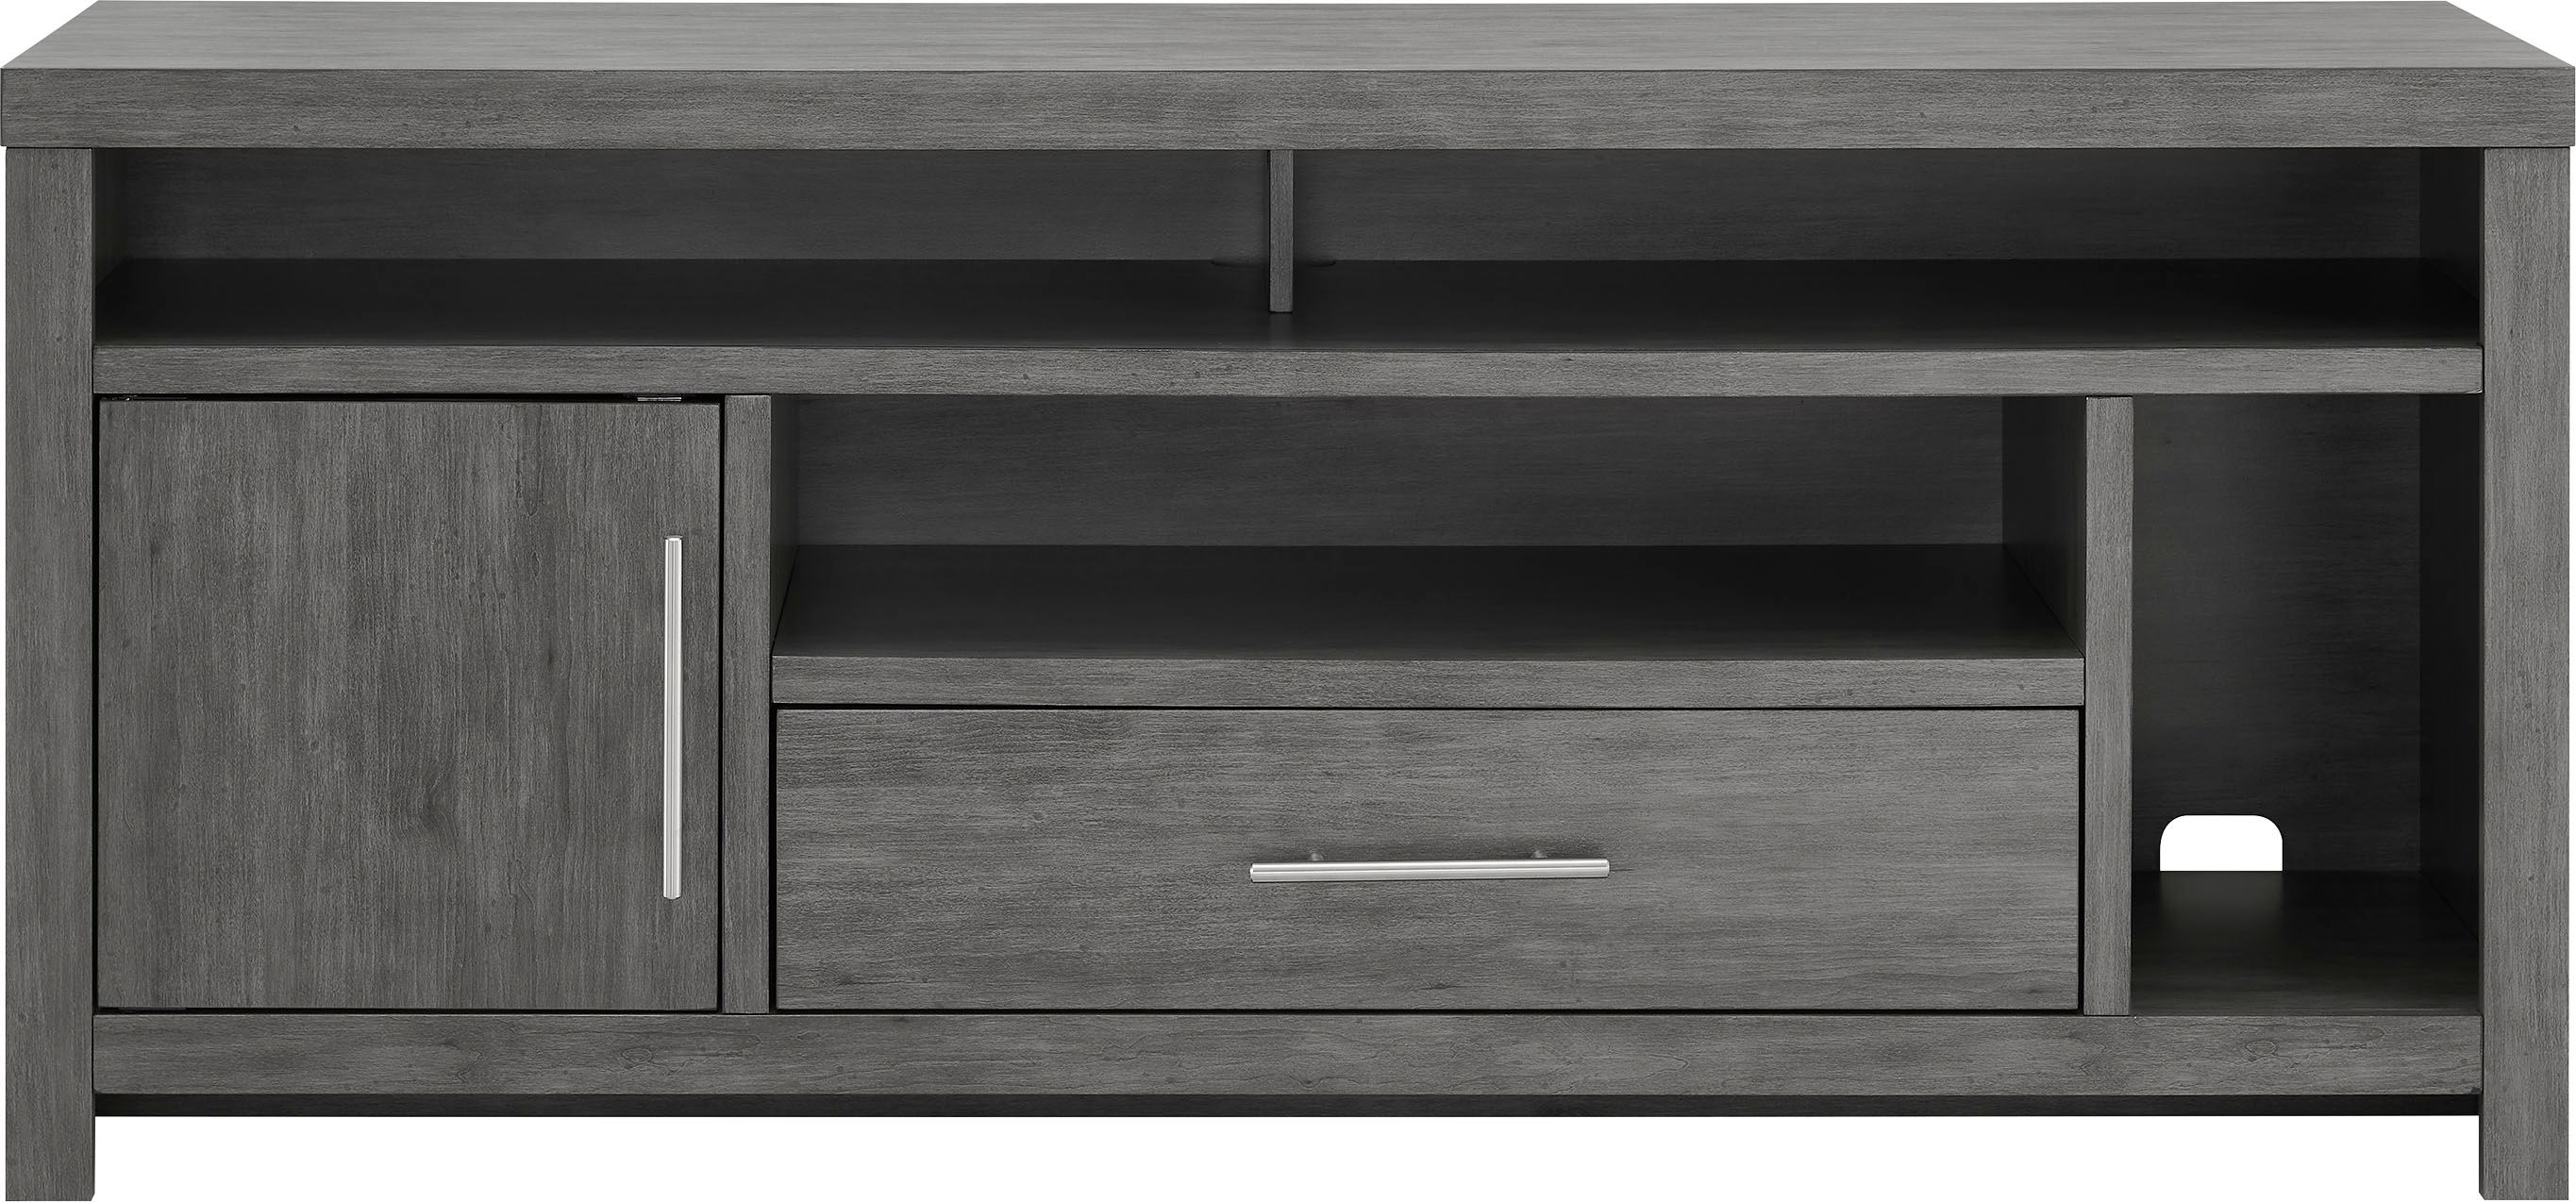 Insignia Gaming TV Stand for Most TVs Up to 65